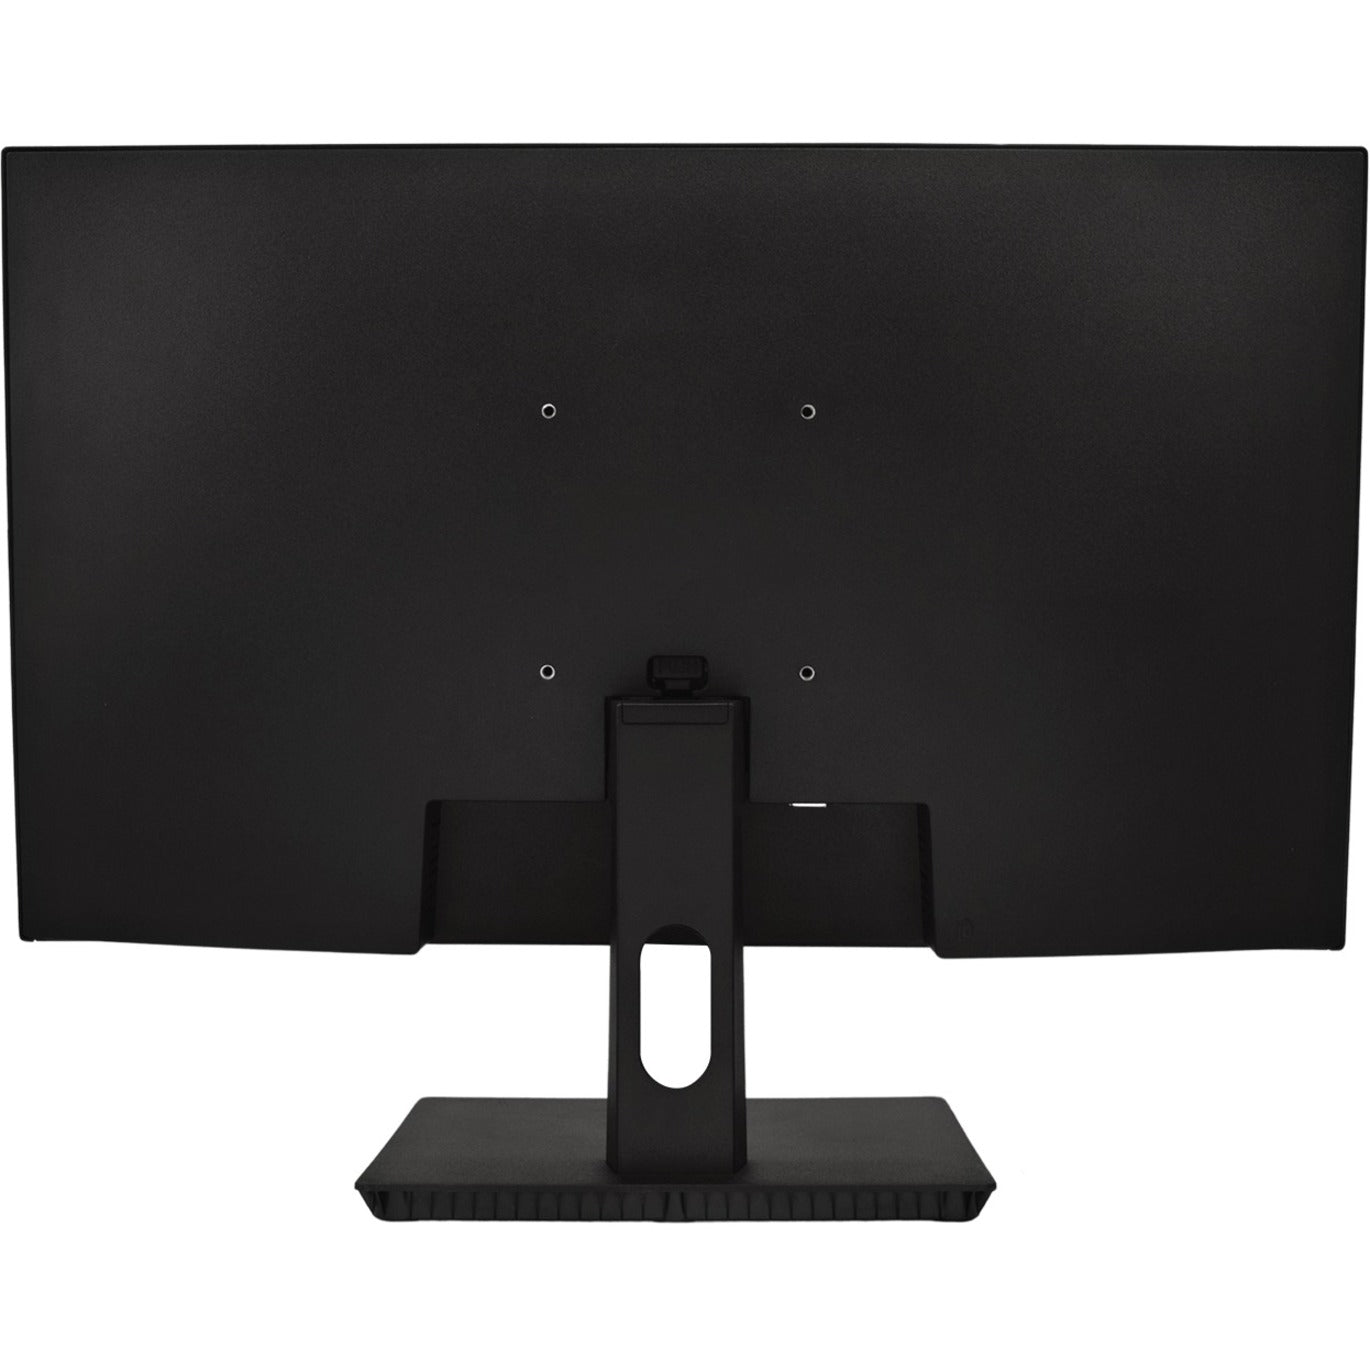 V7 L238IPS-N 23.8" Full HD LCD Monitor - Black, Wide Viewing Angle, 1920x1080 Resolution, 60Hz Refresh Rate